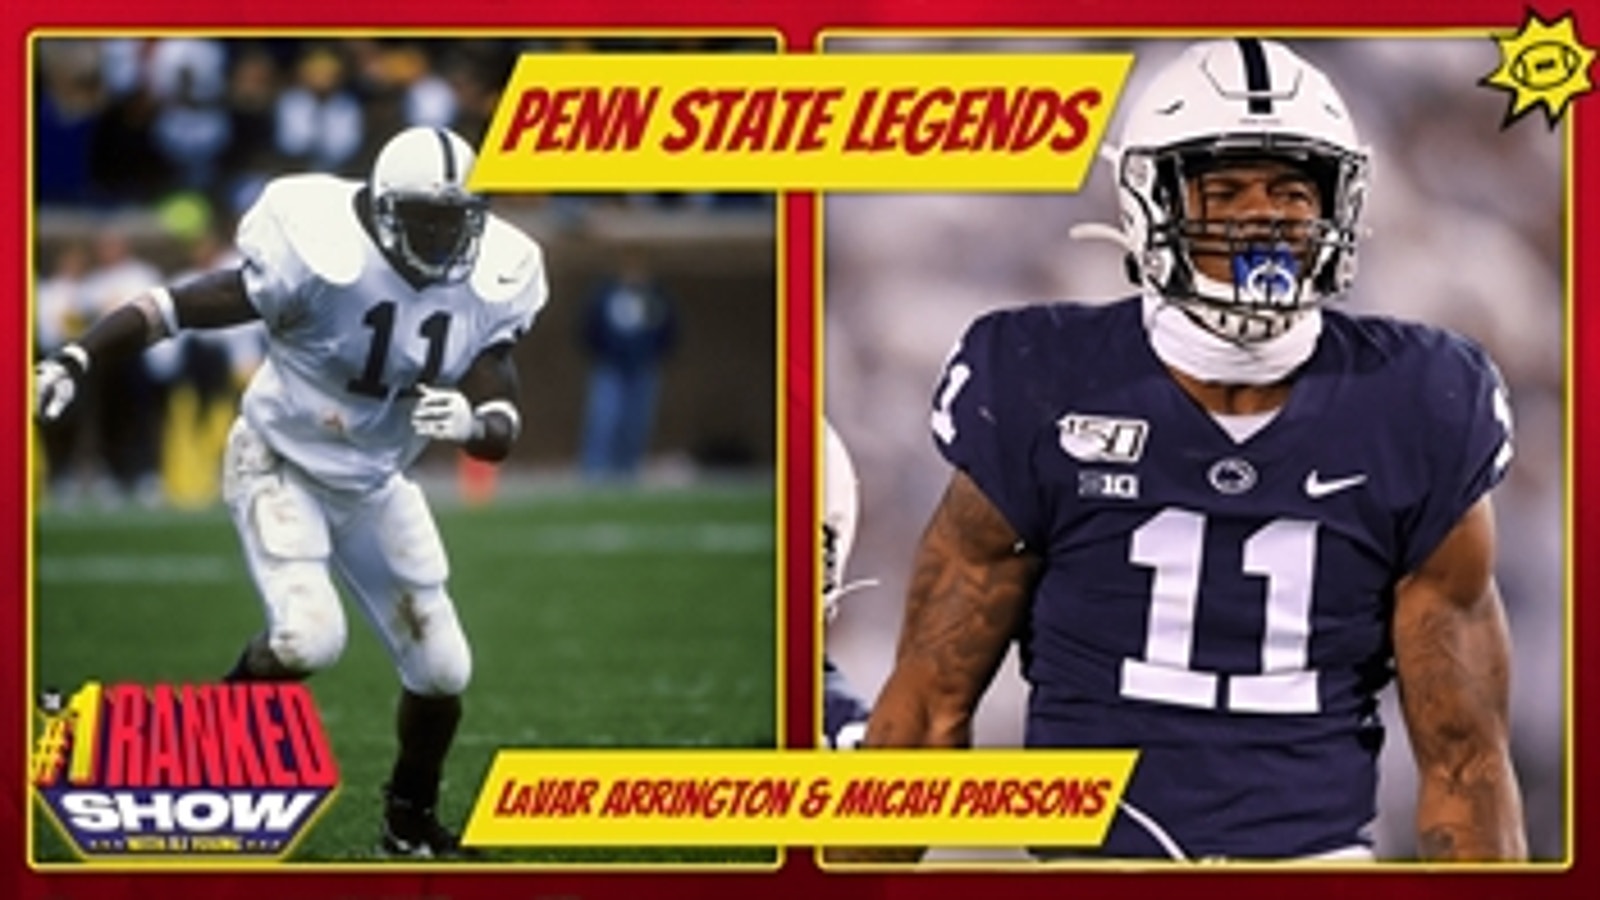 Penn State football legends LaVar Arrington and Micah Parsons open up with RJ Young about their special connection. The two have formed a bond over their similar collegiate careers: both were All-Americans who wore No. 11 at Penn State and play a similar style.